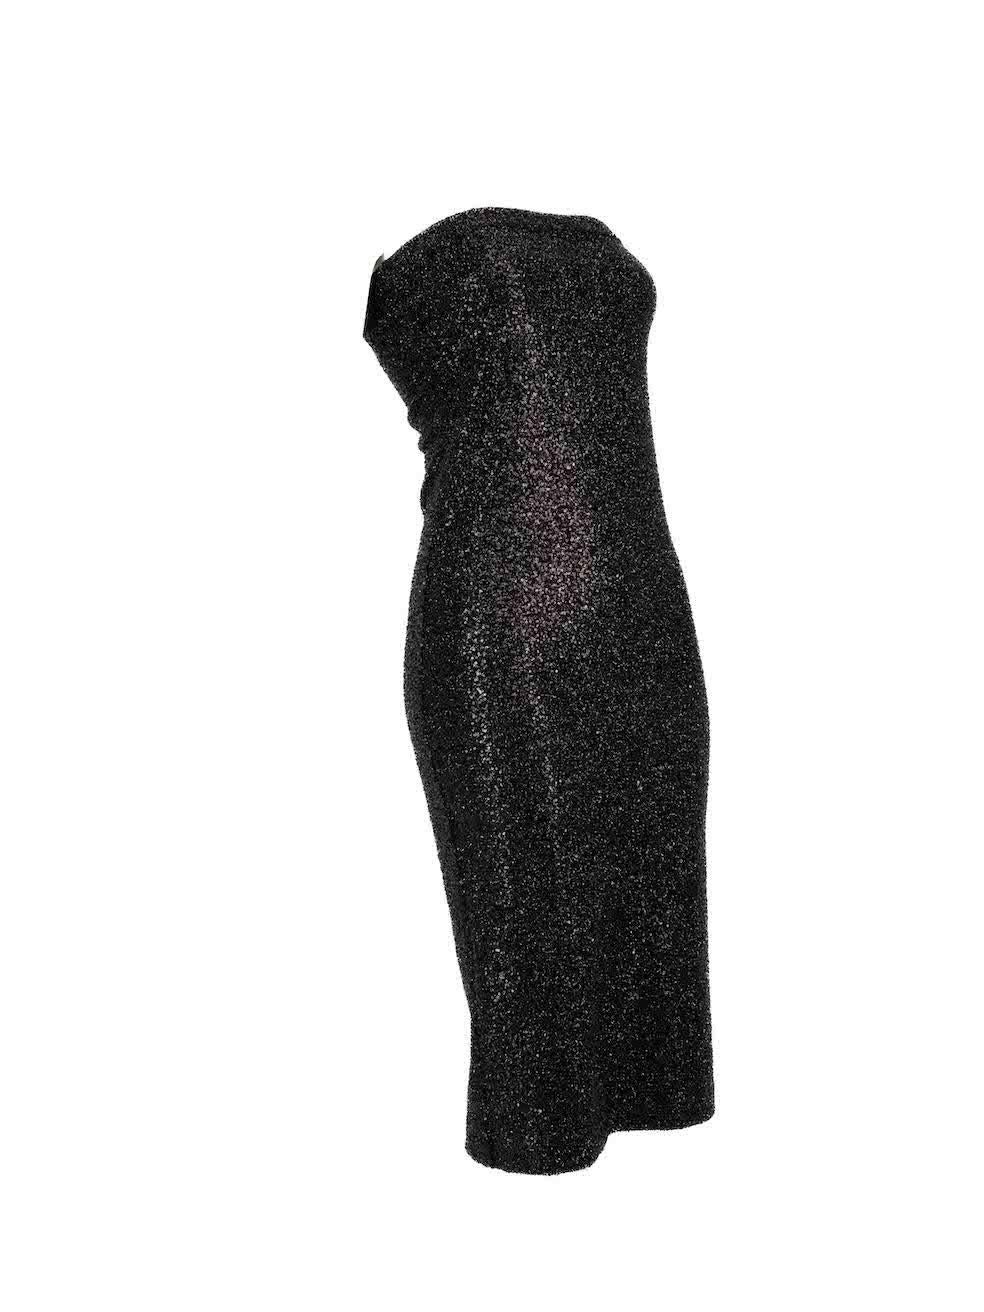 CONDITION is Never worn, with tags. No visible wear to dress is evident. However, the composition label is missing on this new Hanne Bloch designer resale item.
 
 
 
 Details
 
 
 Black
 
 Synthetic
 
 Tube dress
 
 Bodycon
 
 Sequinned
 
 Knee